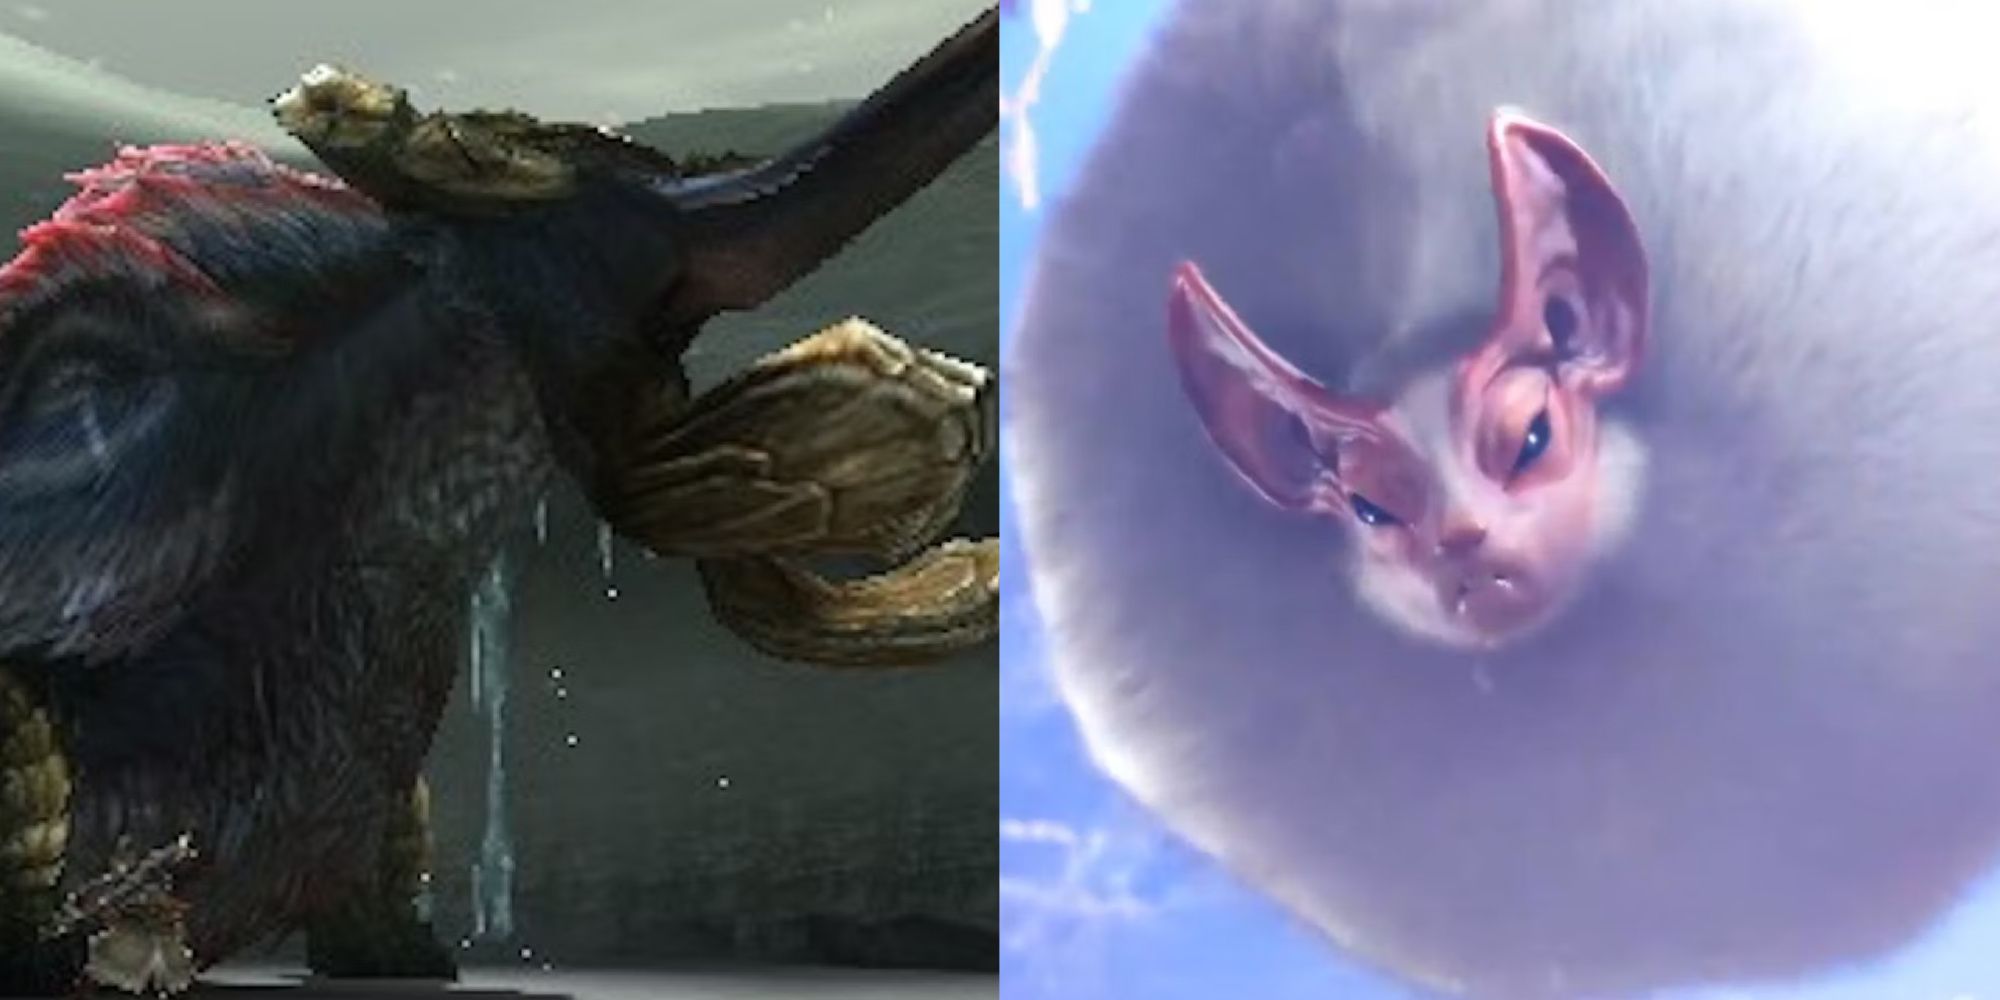 A split image of Gammoth and Paolumu from Monster Hunter